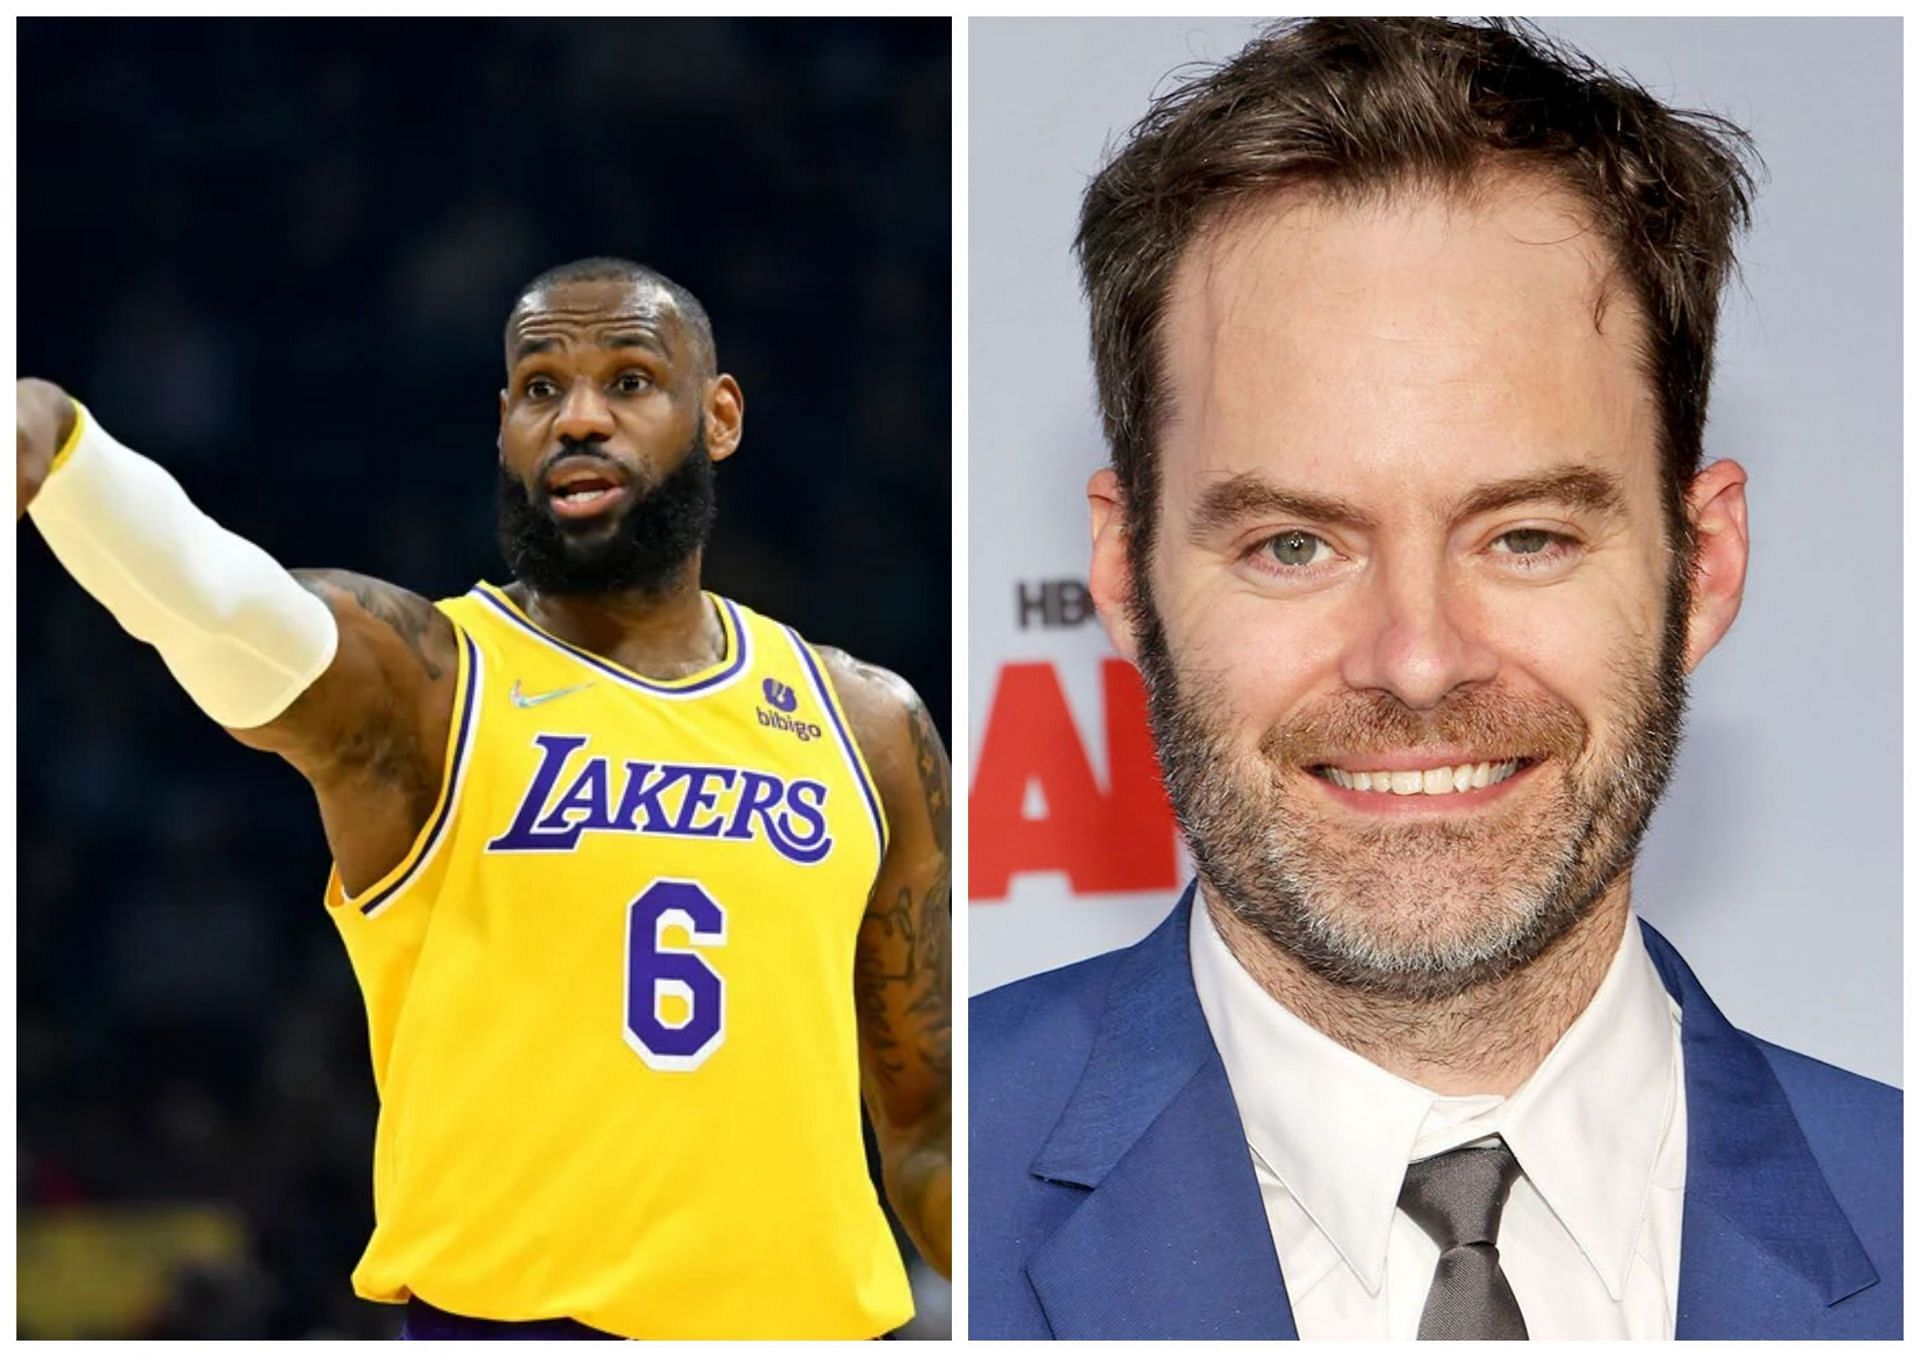 LeBron James and Bill Hader were co-stars in the &quot;Trainwreck&quot; movie back in 2015